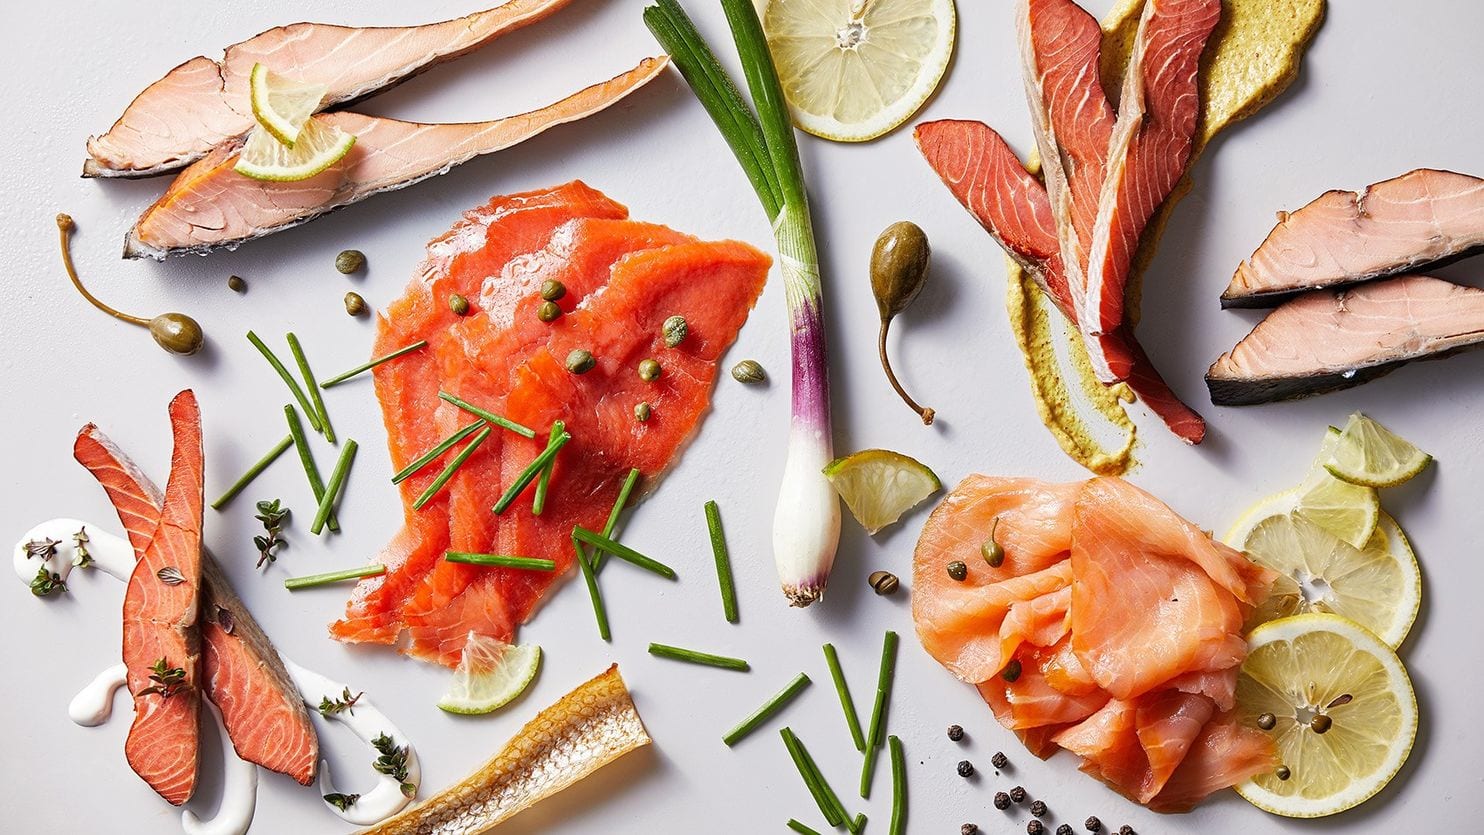 🍤 Can We Guess Your Age and Gender Based on the Seafood Dishes You’ve Eaten? Smoked Salmon